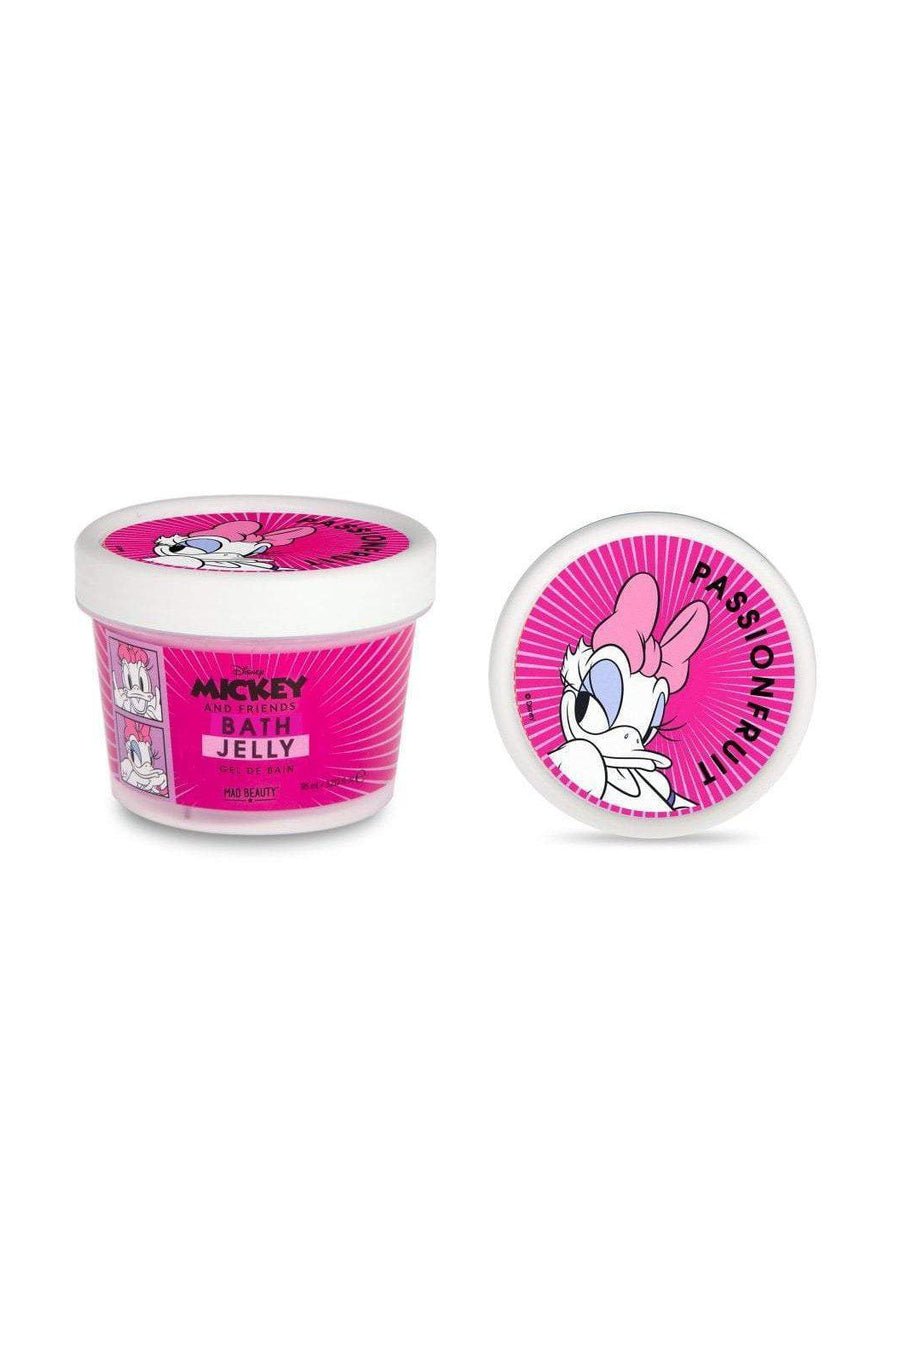 Buy Disney Mickey &amp; Friends Bath Jelly at Spoiled Brat  Online - UK online Fashion &amp; lifestyle boutique